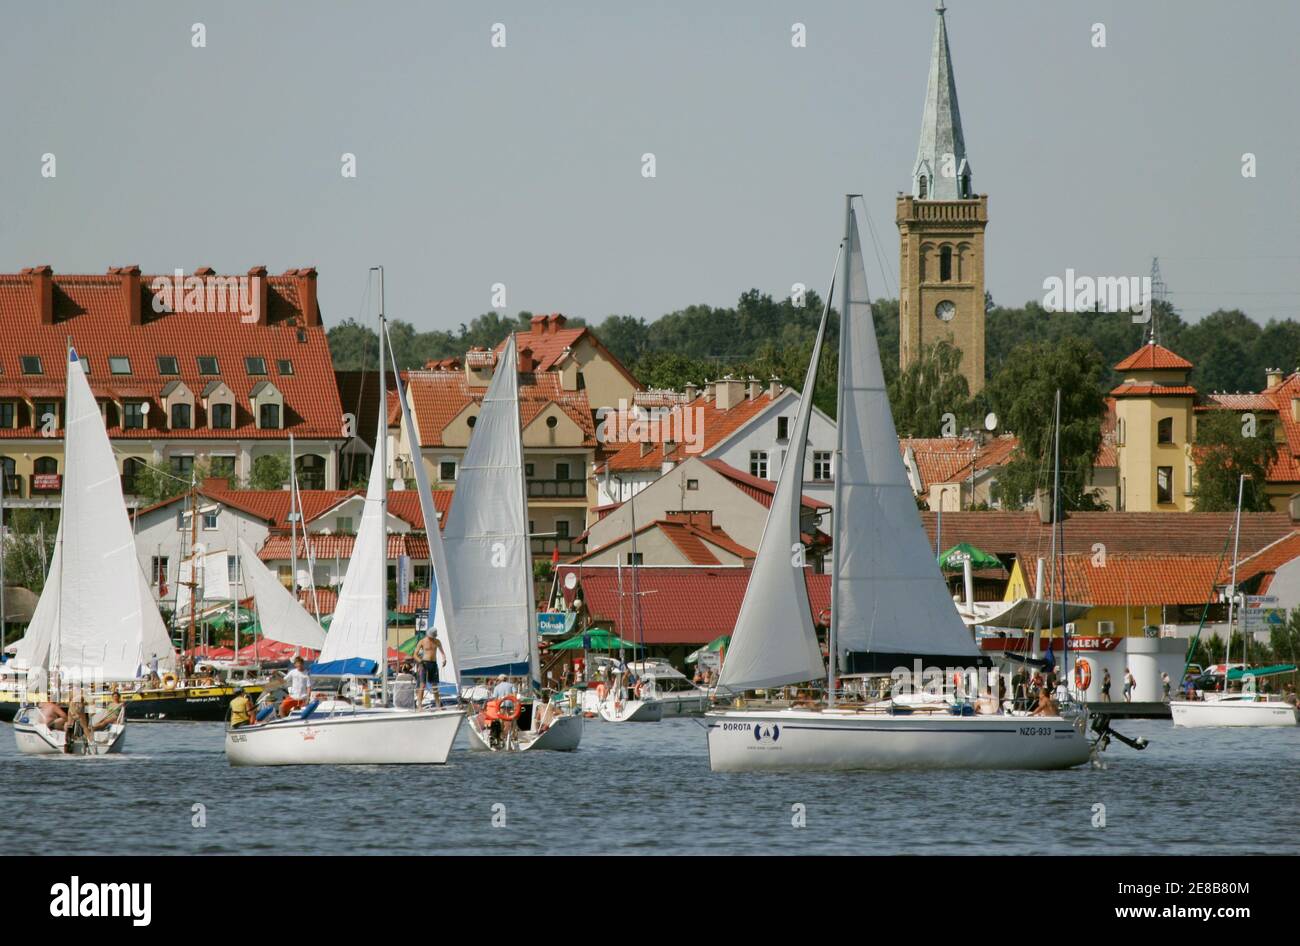 People sail along Mikolajskie Lake, near the town of Mikolajki in Masurian  Lake District, north eastern Poland August 20, 2009. The lake district,  which was shaped by the Pleistocene ice age, contains